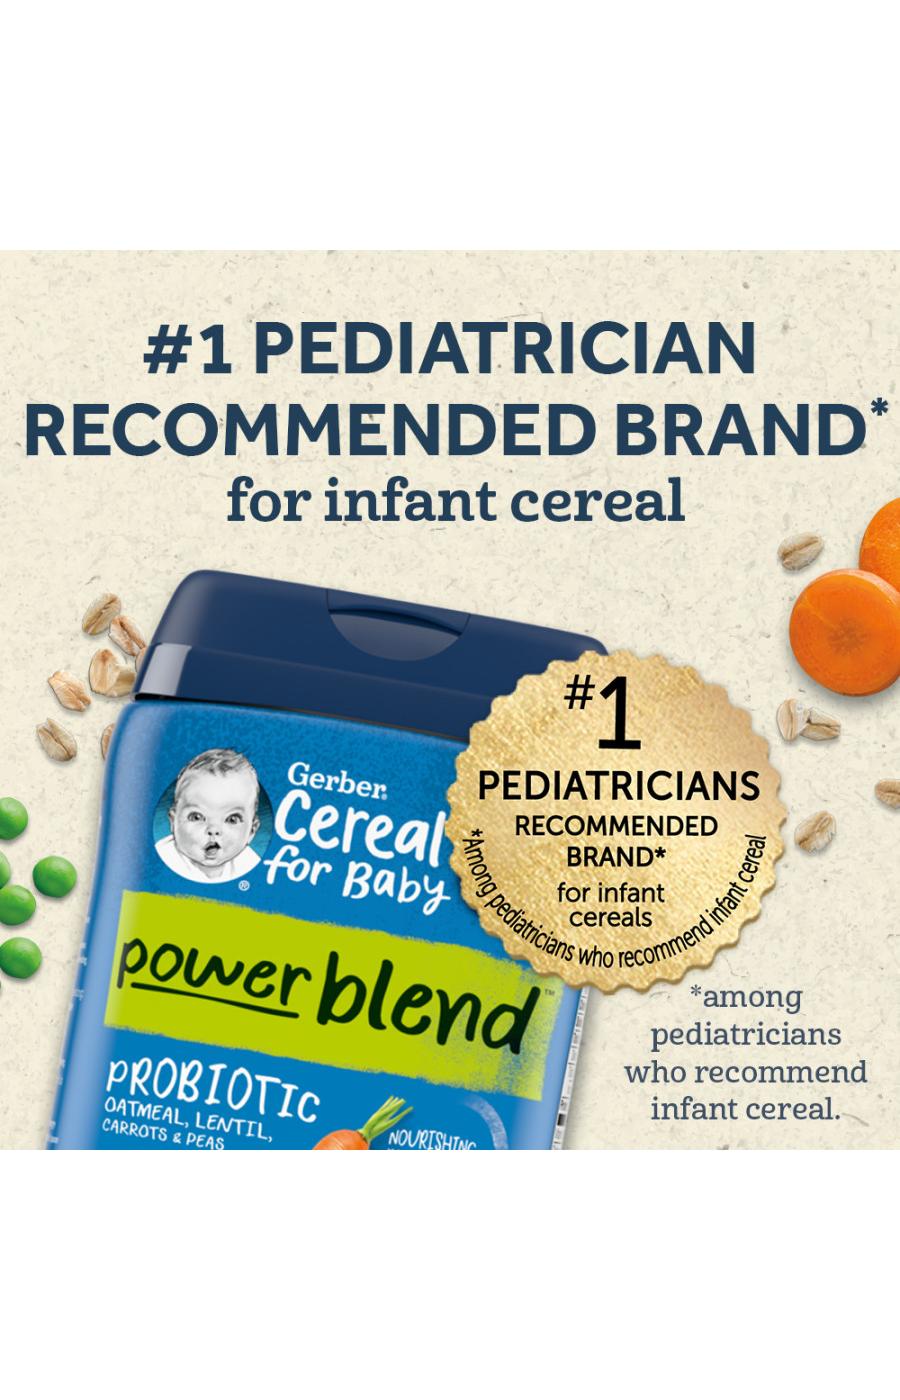 Gerber Cereal for Baby PowerBlend Probiotic - Oatmeal Lentil Peach & Apple; image 7 of 7